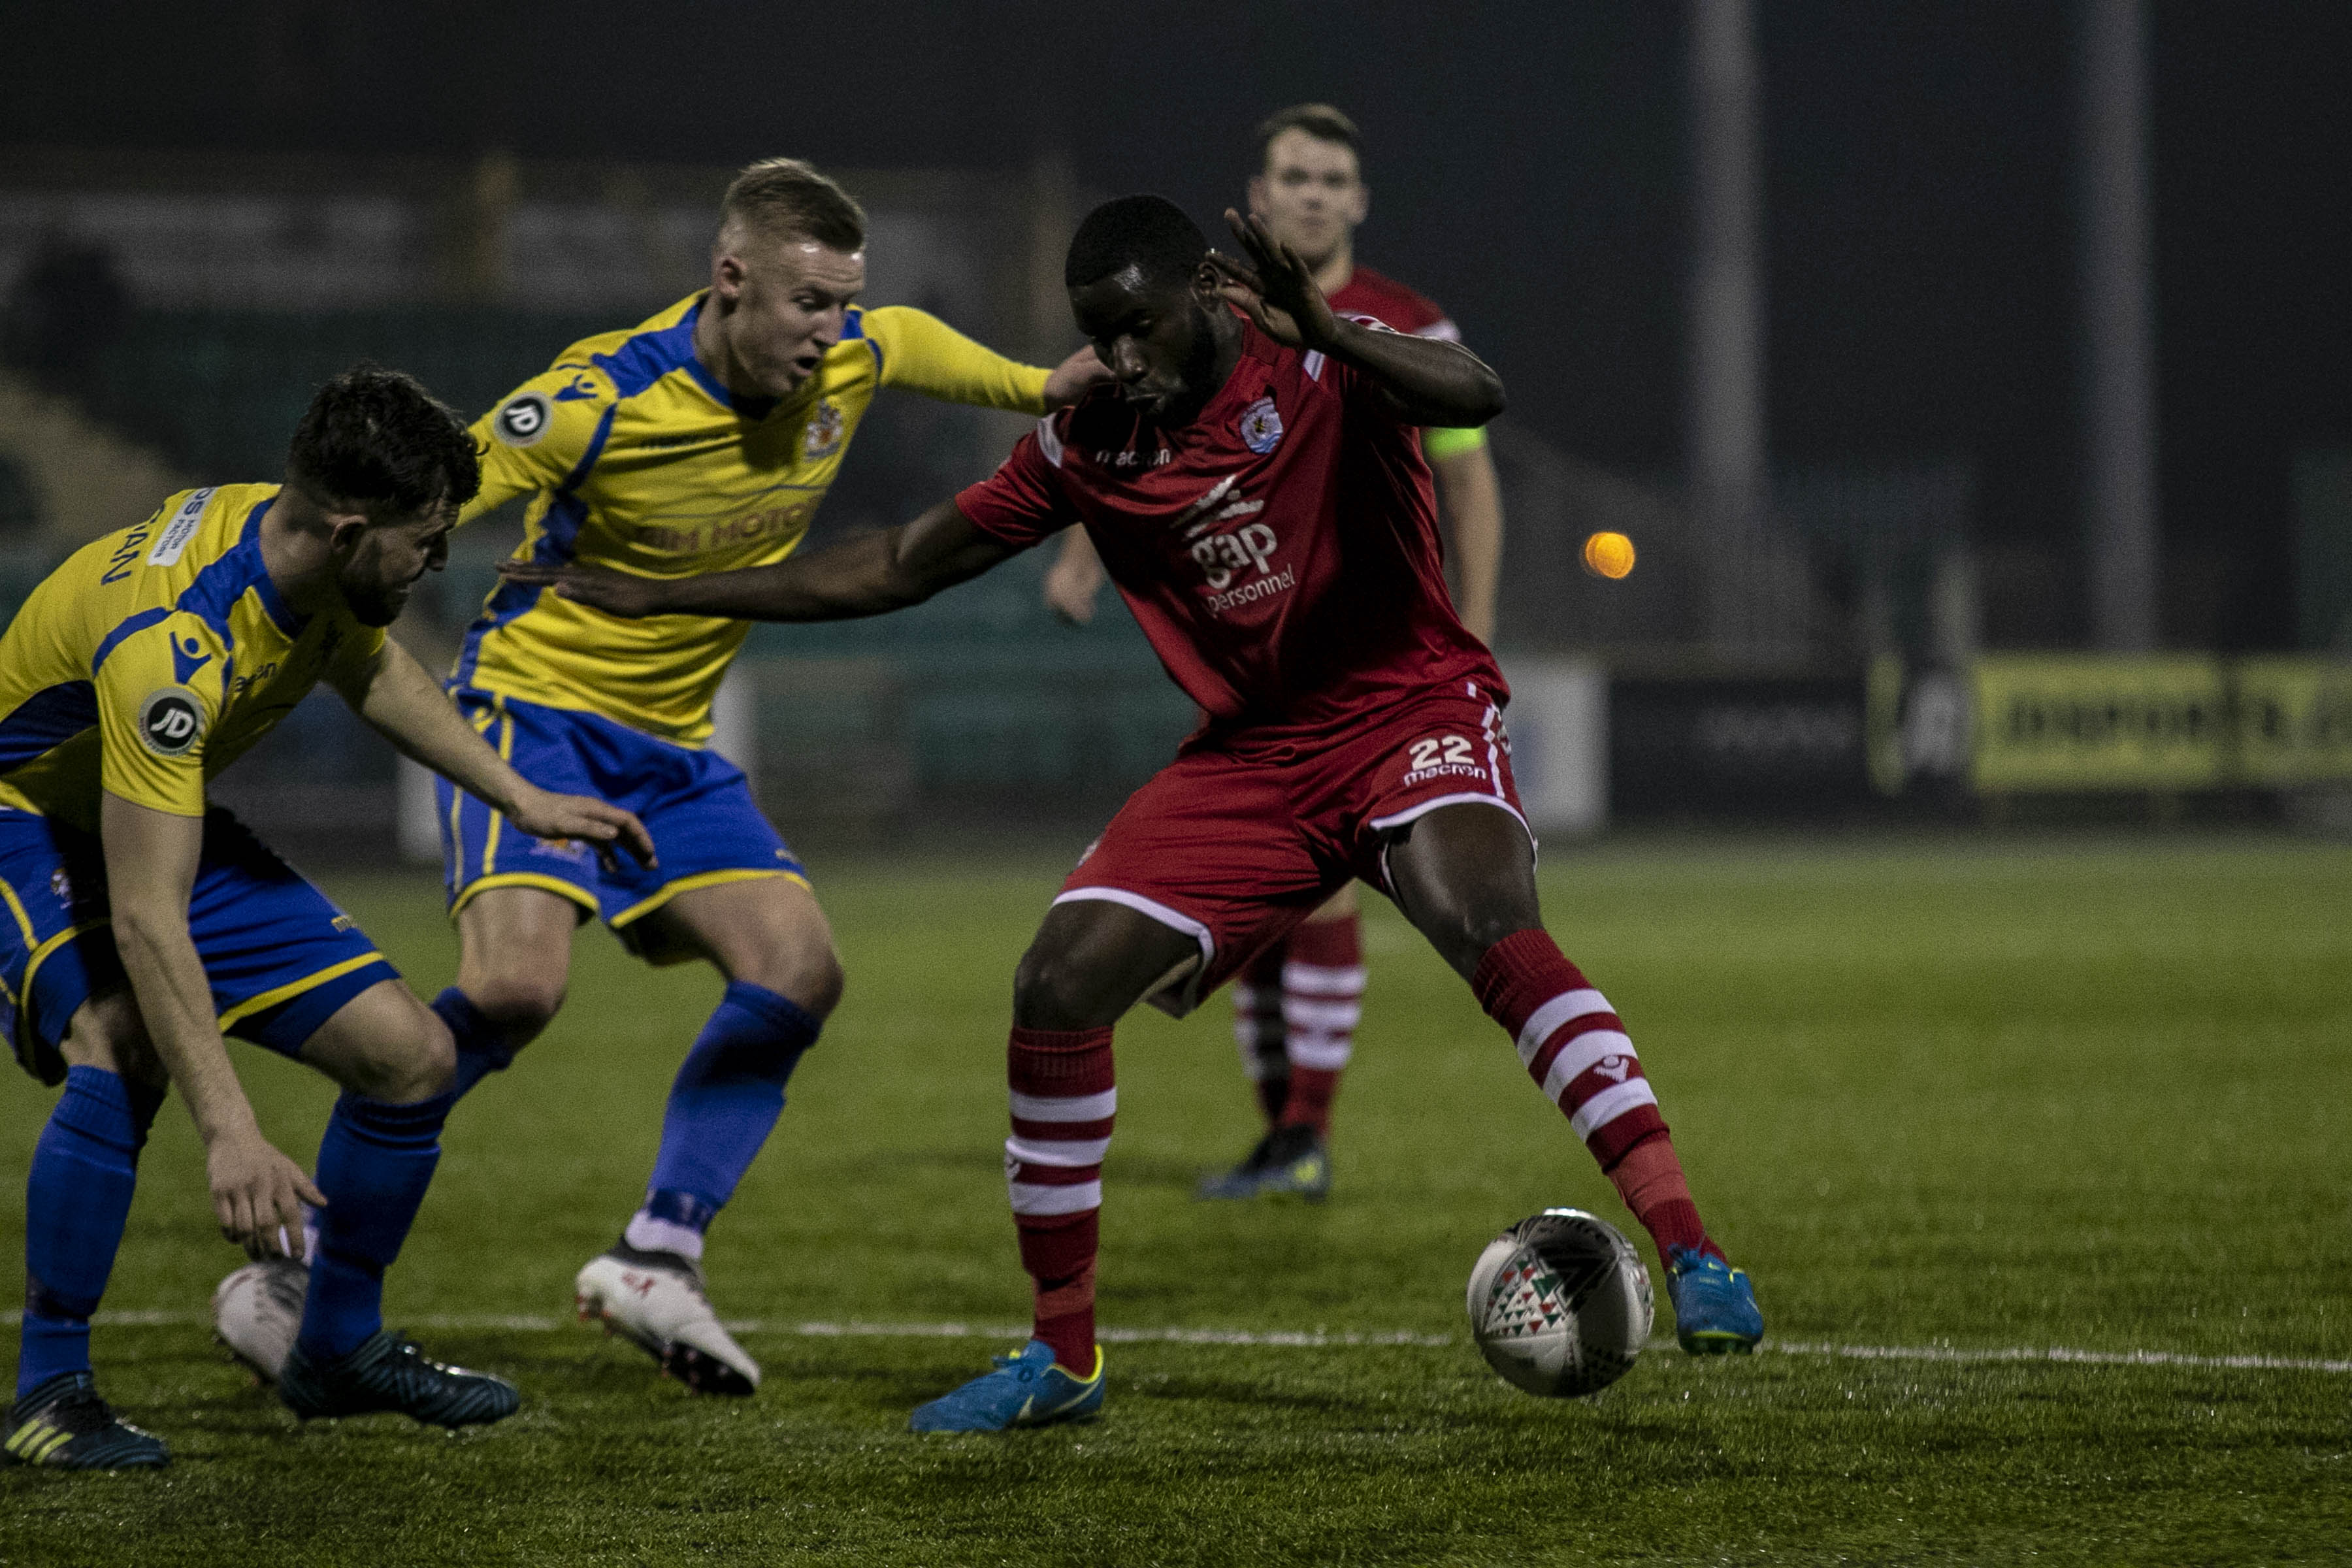 Title rivals Barry and Connah's Quay in competitive draw at Jenner Park